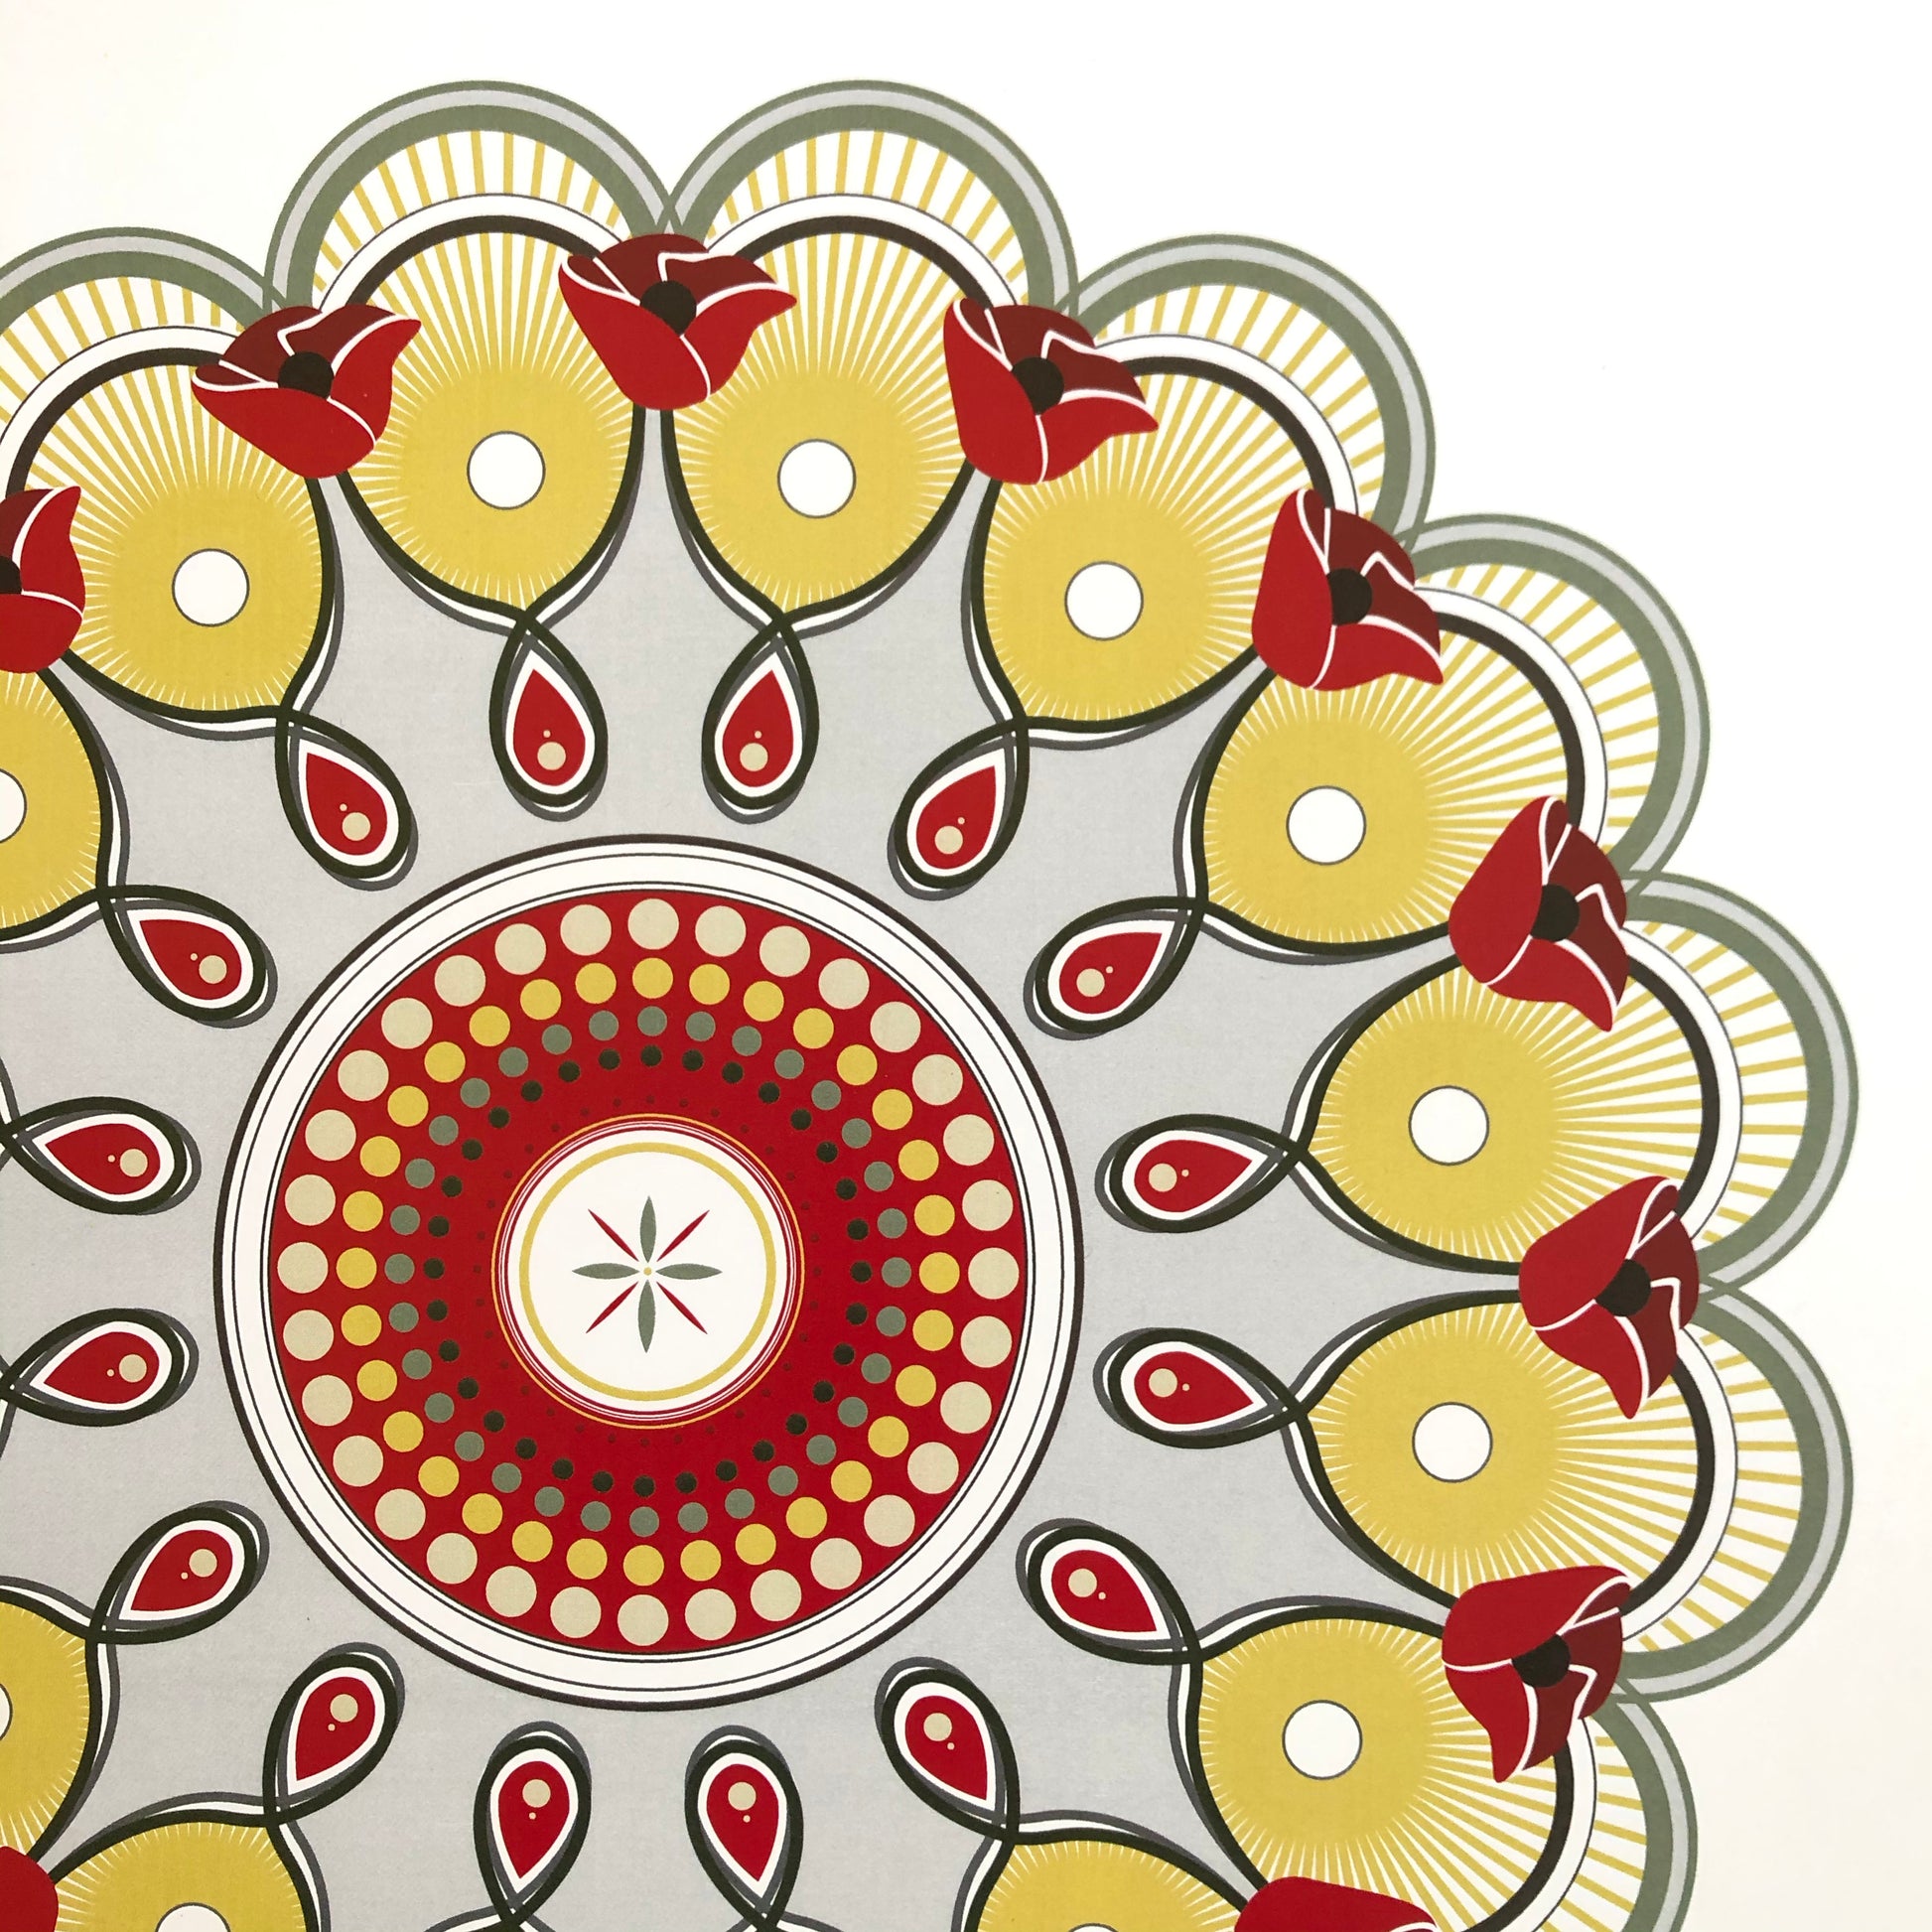 Detail view of Tia Hapner's Poppy Mandala Print with repeating circular shapes, poppies, and rays.  